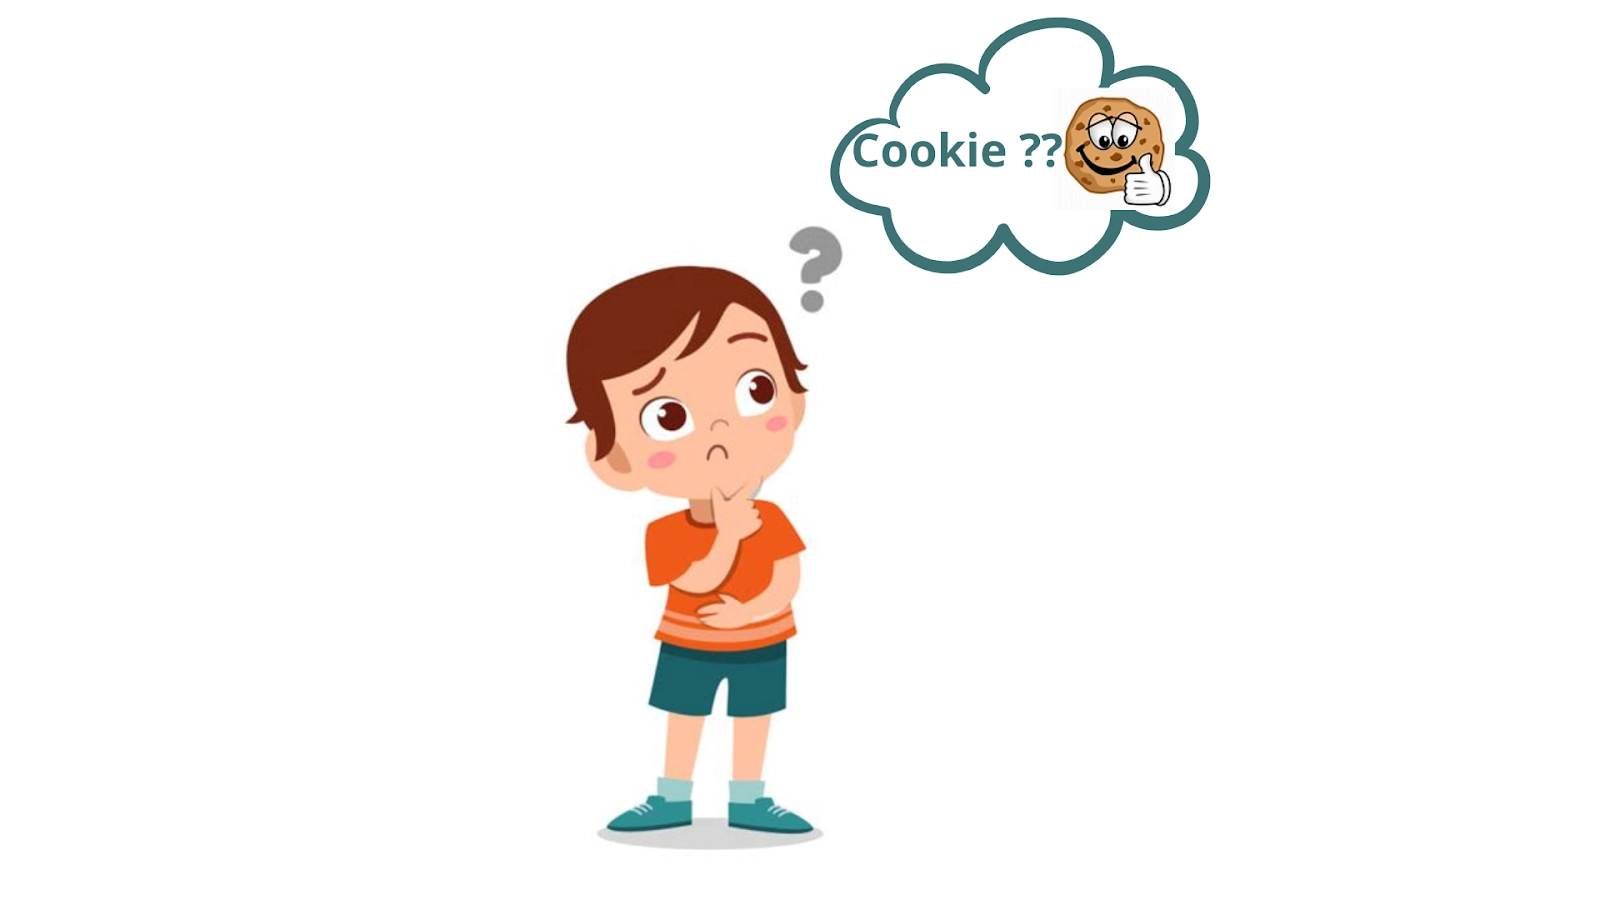 Create and capture cookies using Postman's cookie manager